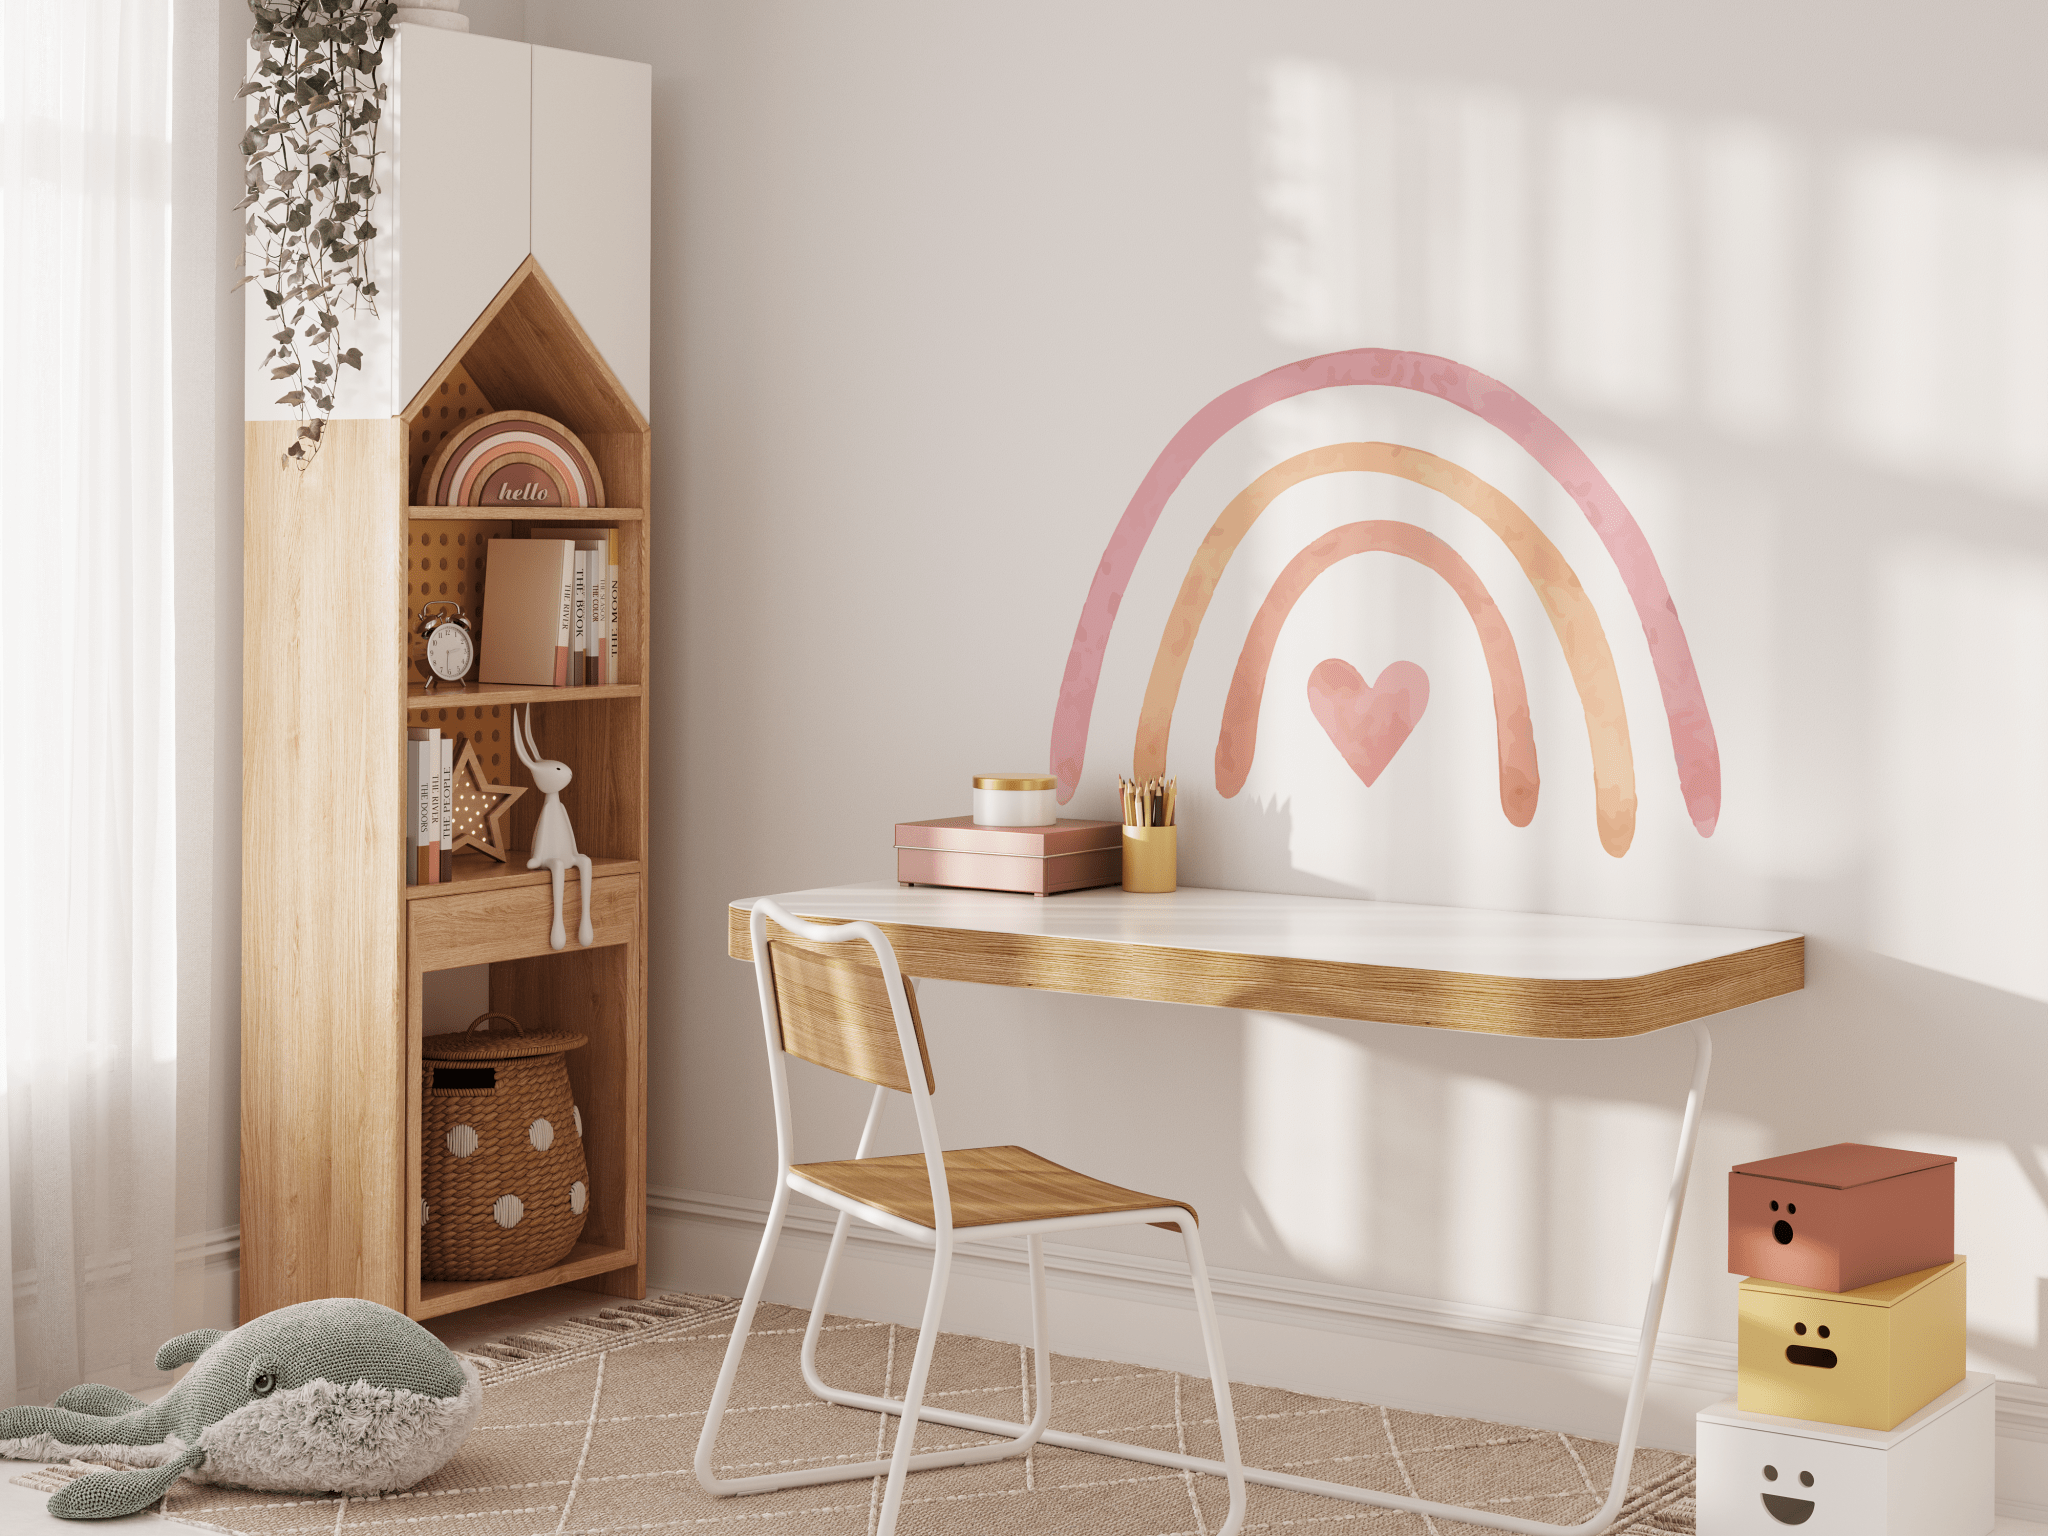 A bright and airy homeschool or study room for a child with a pastel rainbow wall decal. This room features a wooden bookshelf filled with supplies, a minimalist desk with a white chair, and playful elements like a stuffed octopus toy and colorful storage boxes.